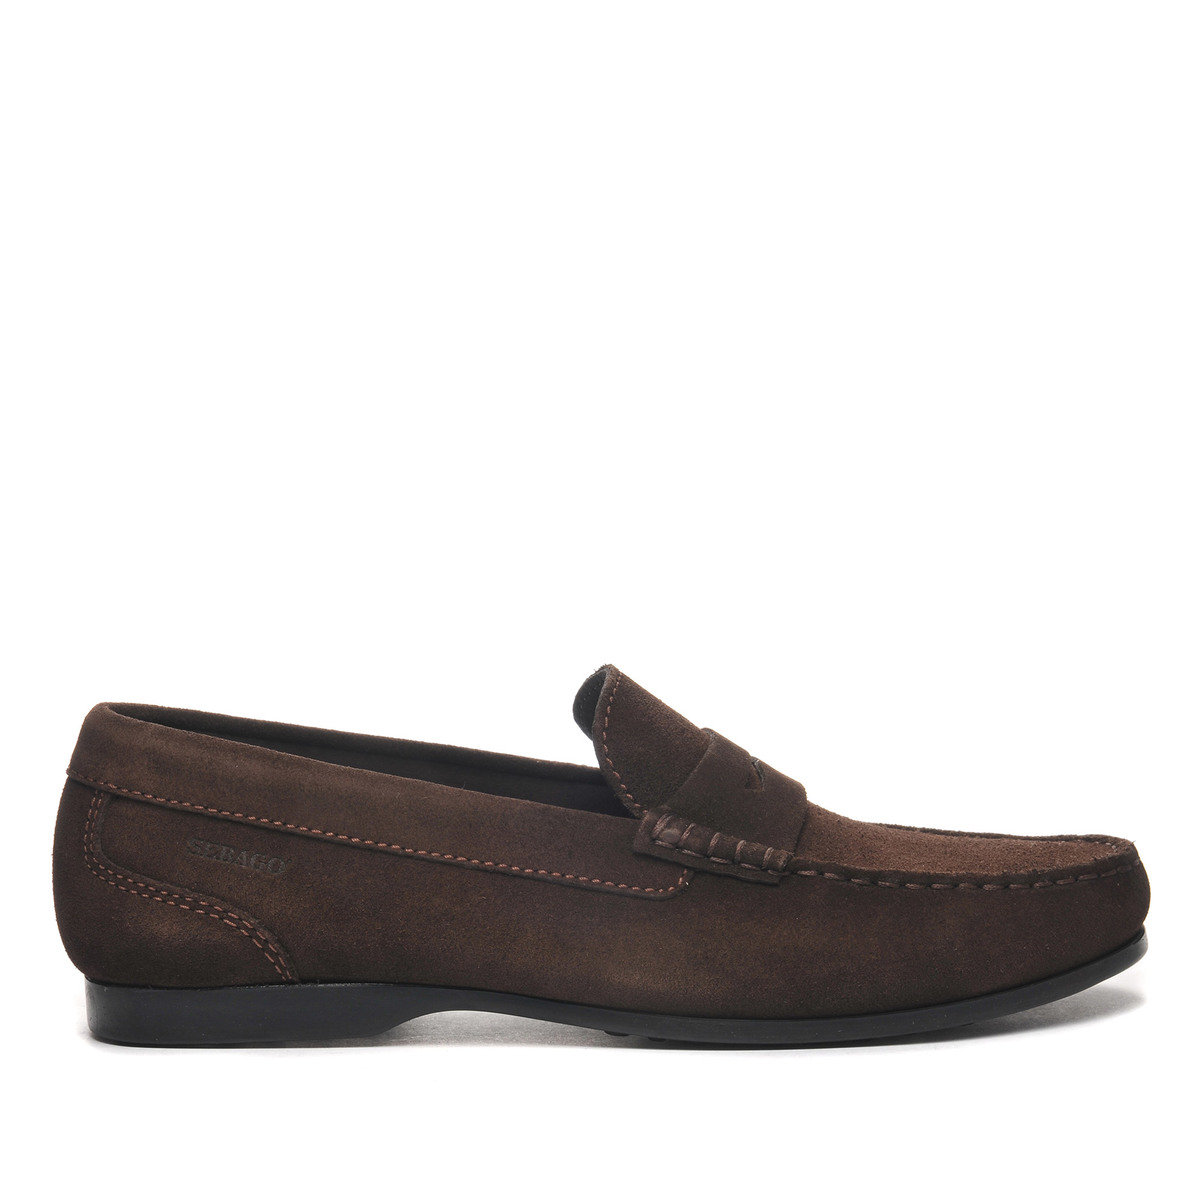 Mens Suede Loafers Sale Uk Hotsell | bellvalefarms.com